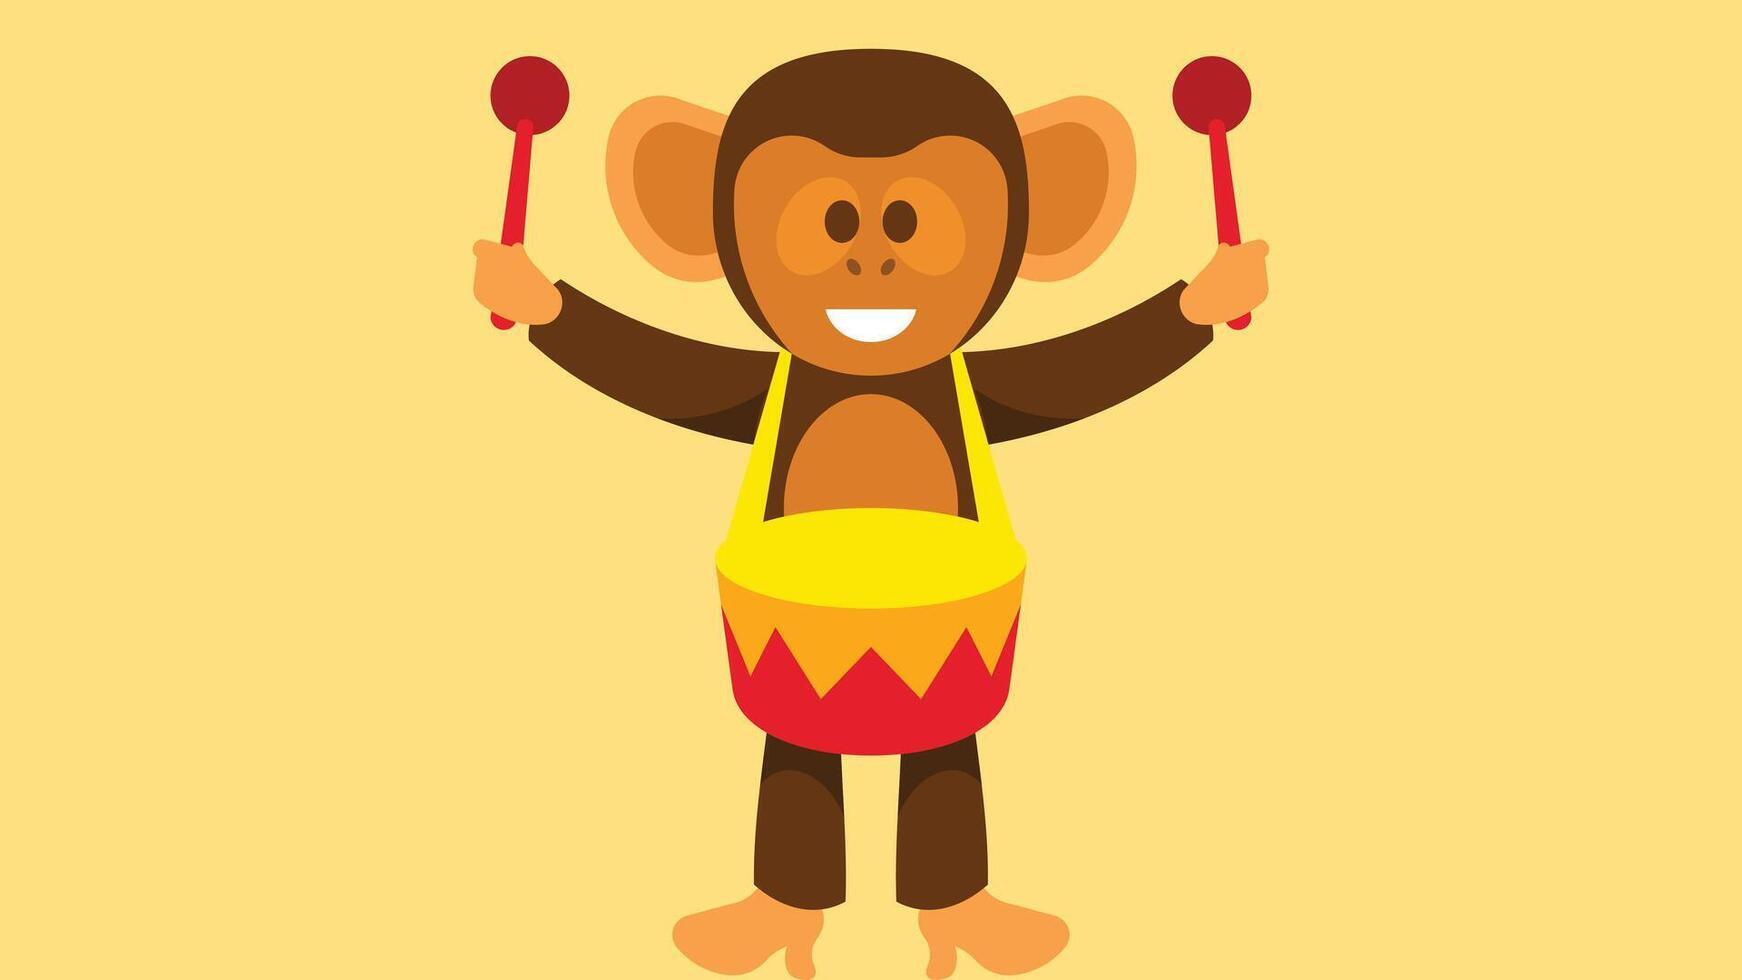 Monkey in a circus playing with balls illustration vector